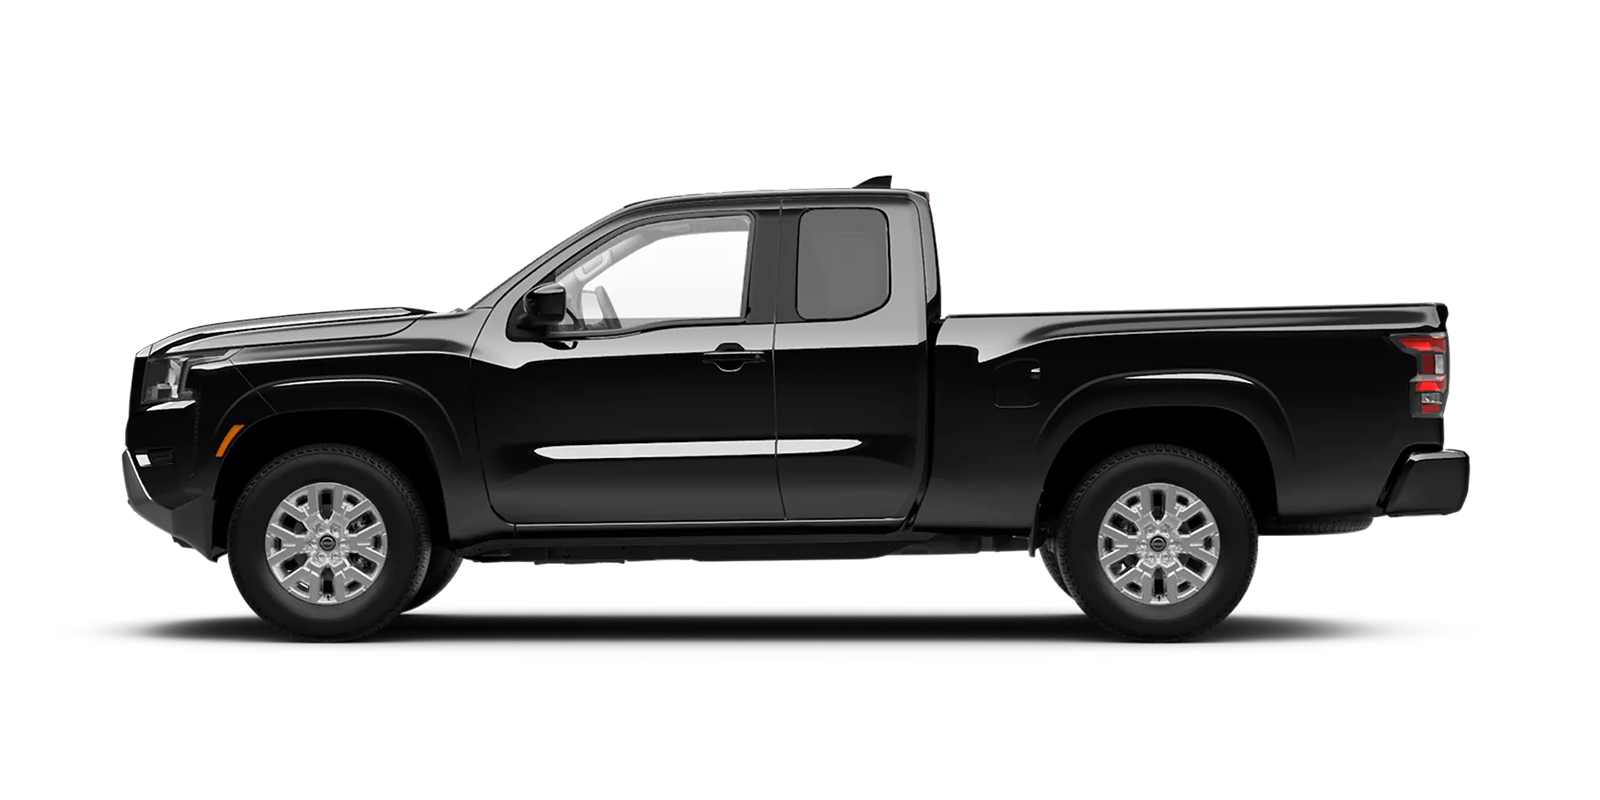 2022 Frontier King Cab SV 4x2 in Super Black | San Leandro Nissan in San Leandro CA